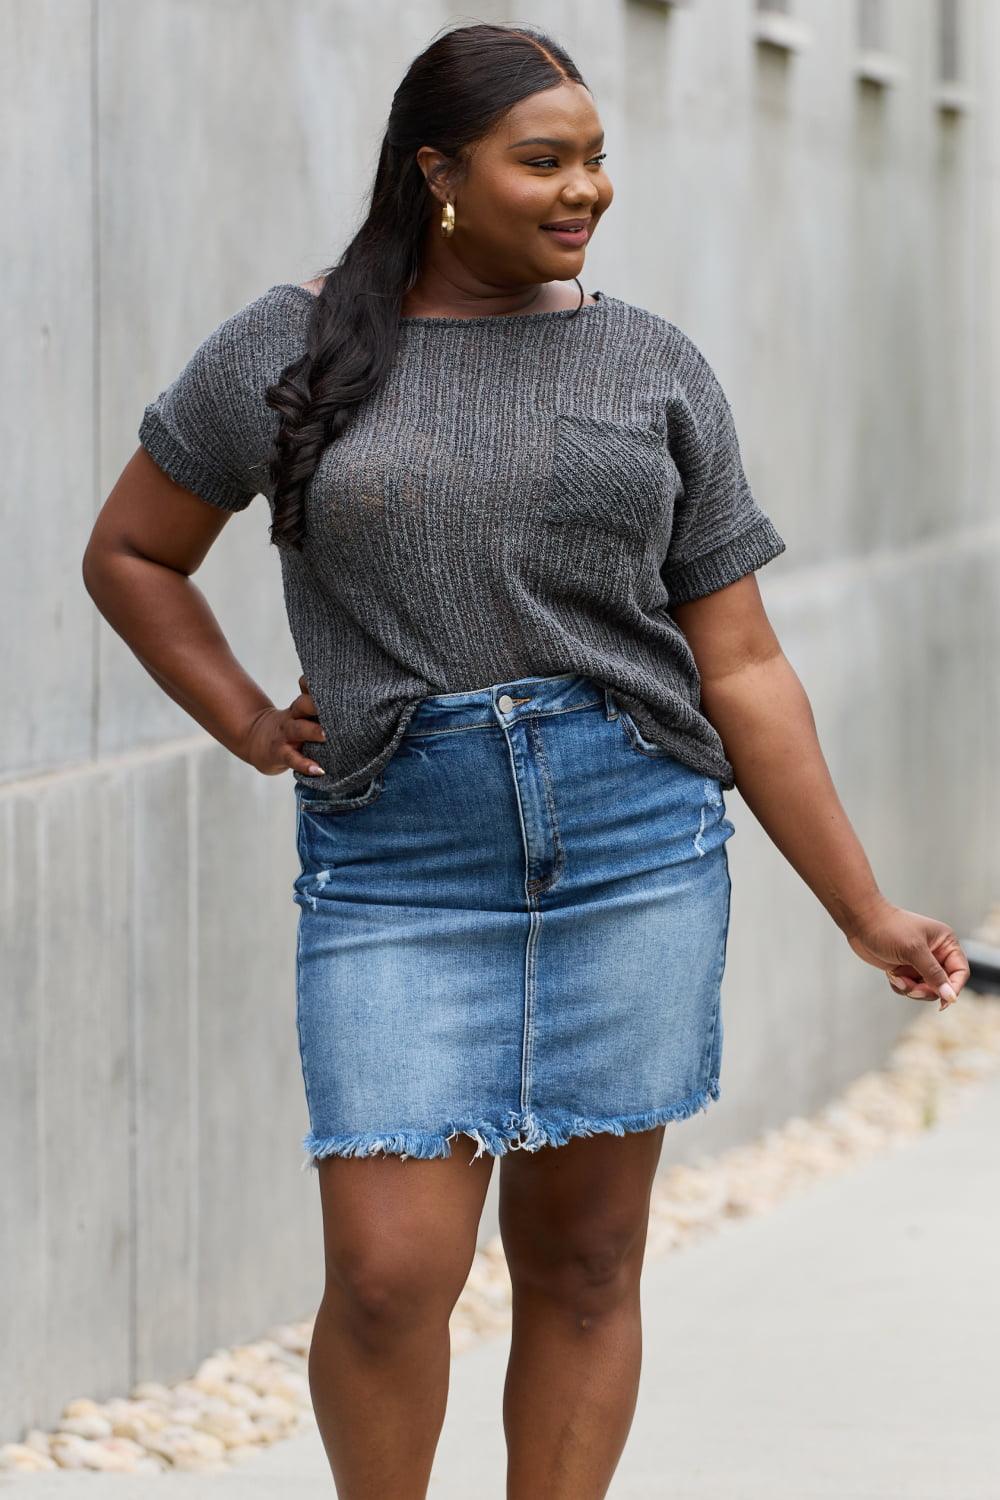 Chunky Knit Short Sleeve Top in Gray - Studio 653